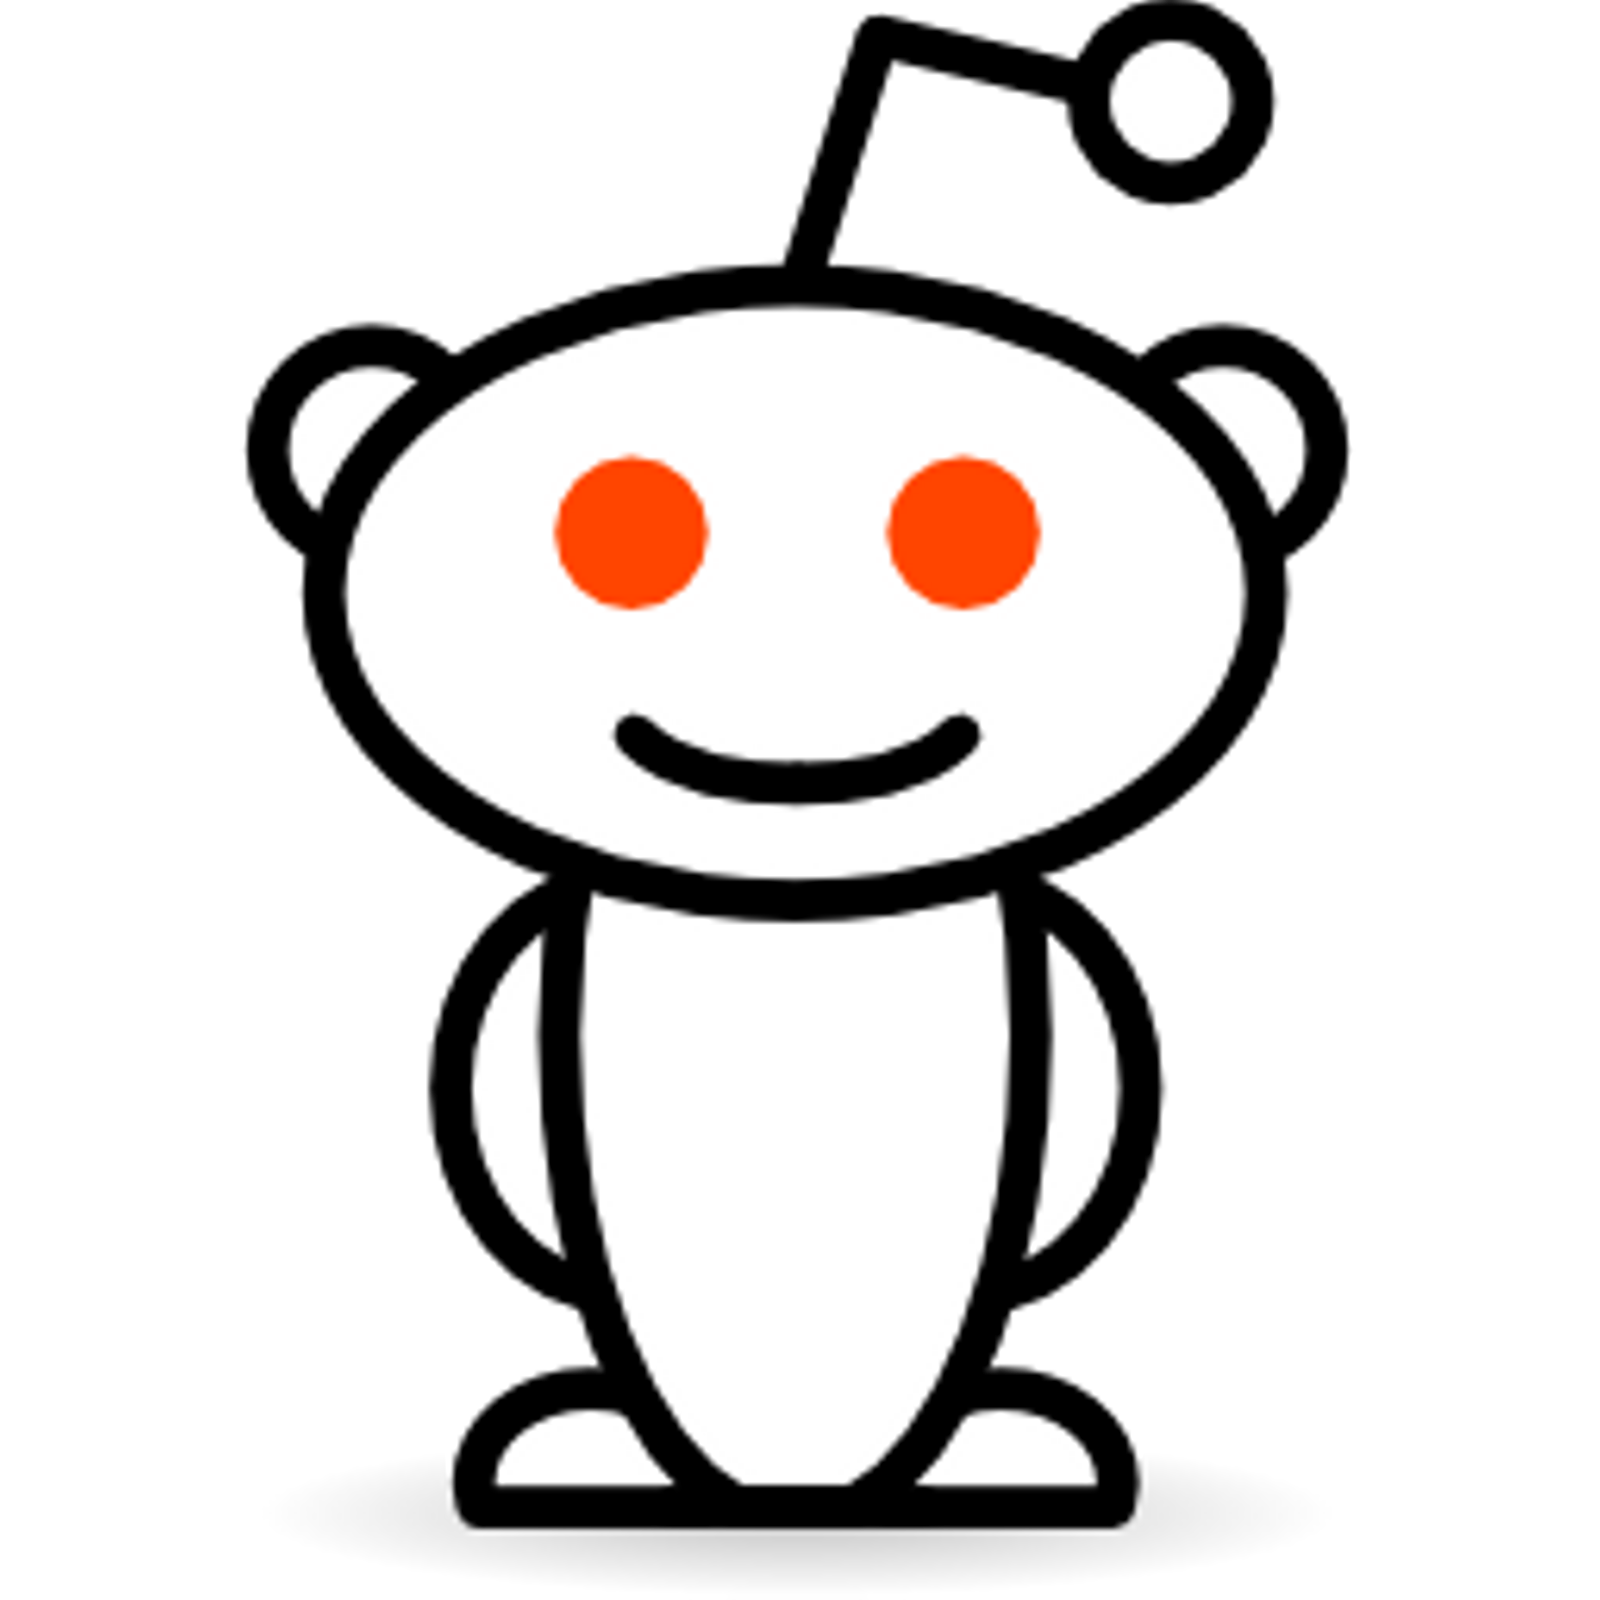 Reddit.com/r/btc Reaches 100,000+ Subscribers, A Victory for Censorship Resistance